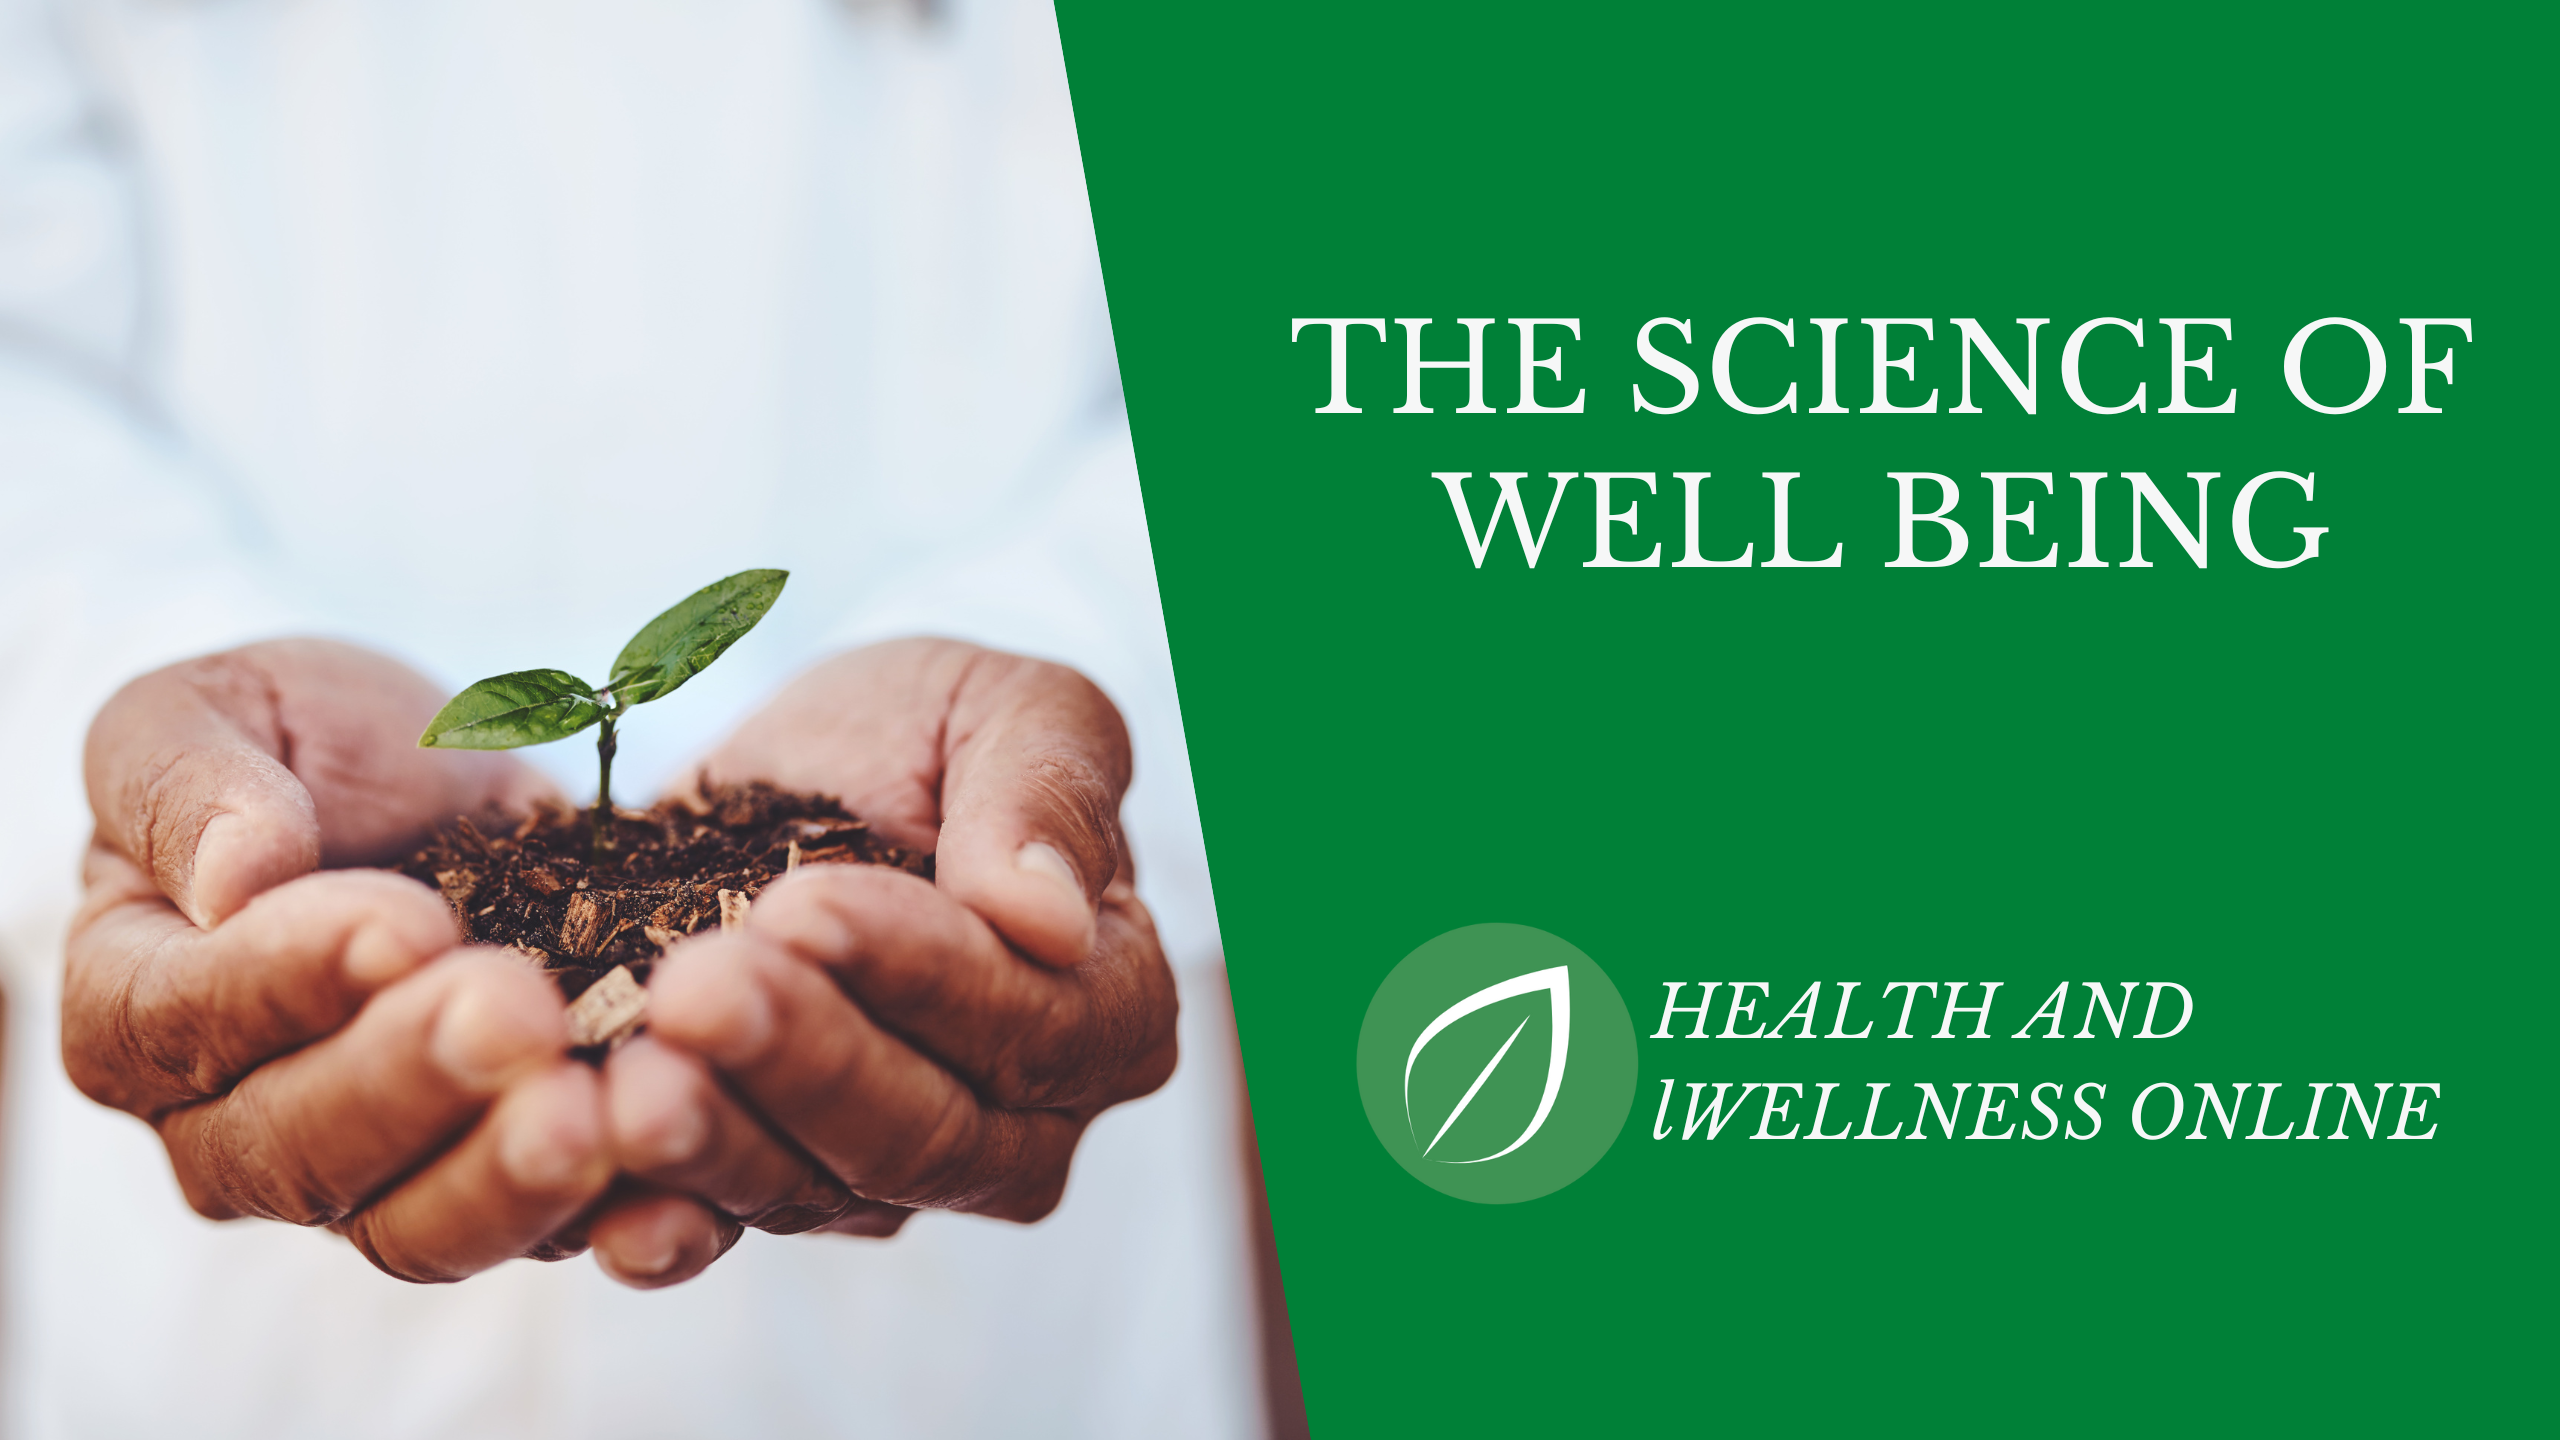 The Science of Well Being is a 4 CE CH course by Health and Wellness Online.